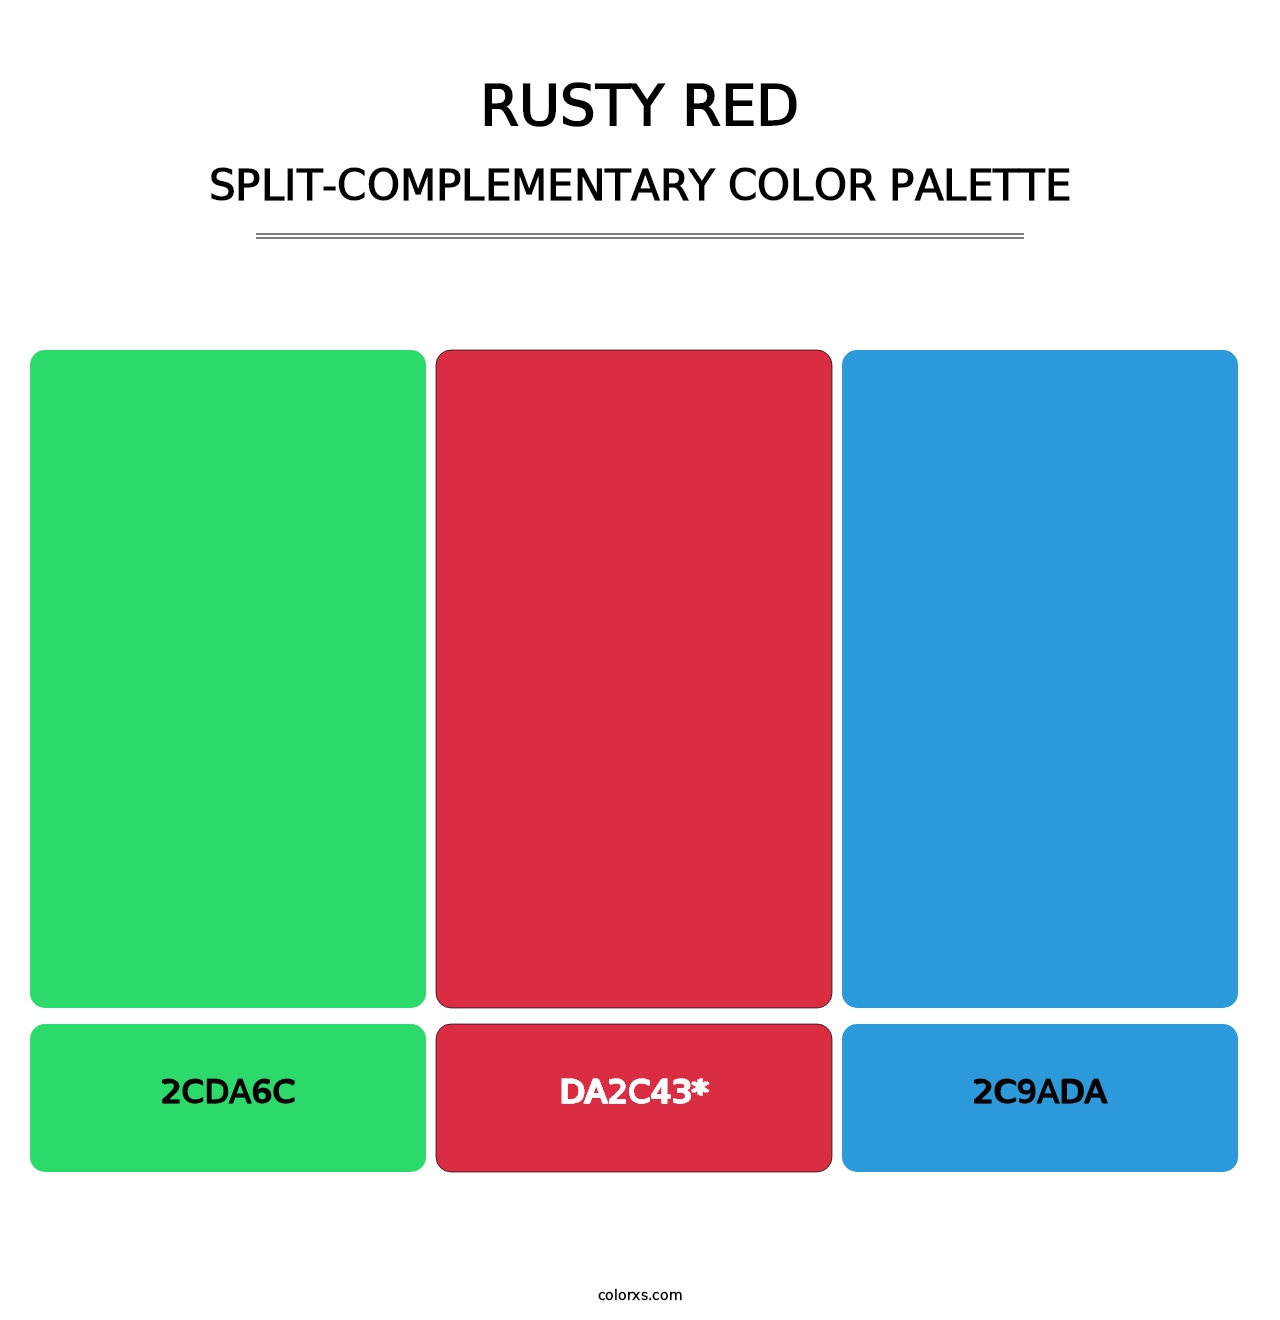 Rusty Red - Split-Complementary Color Palette